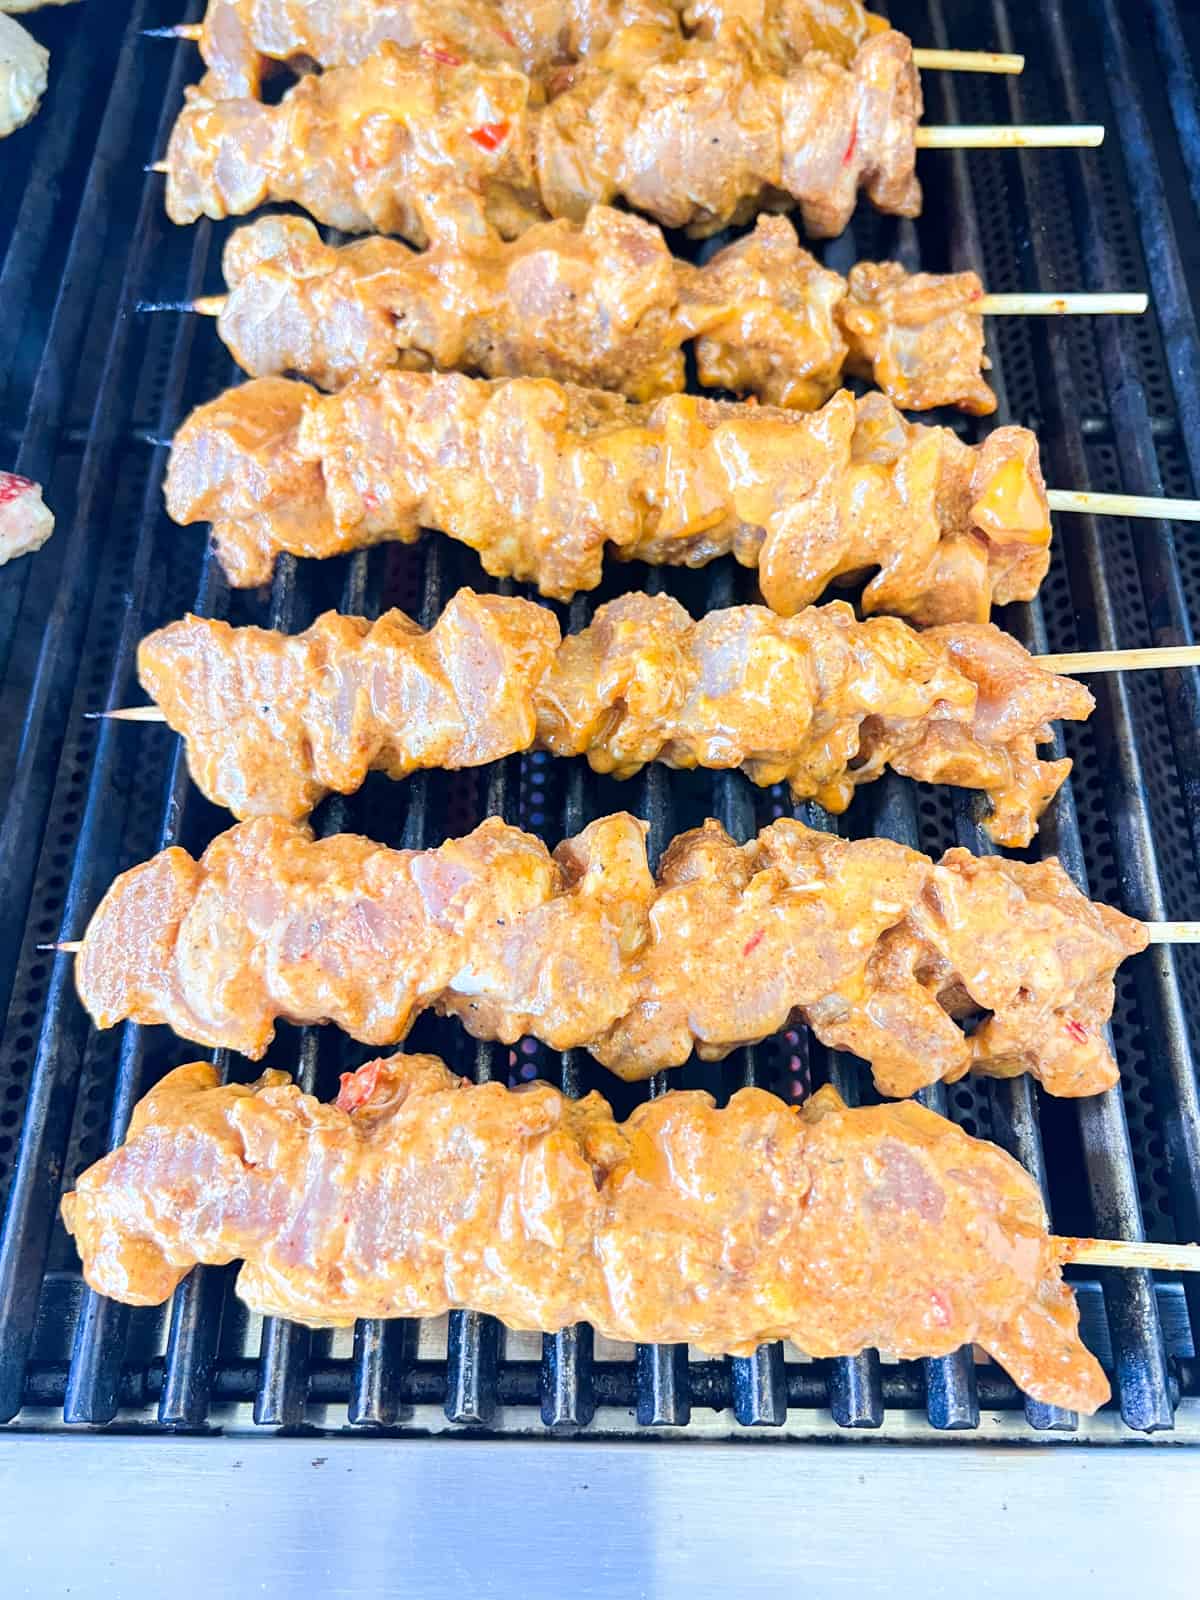 Chicken skewers on grill cooking.